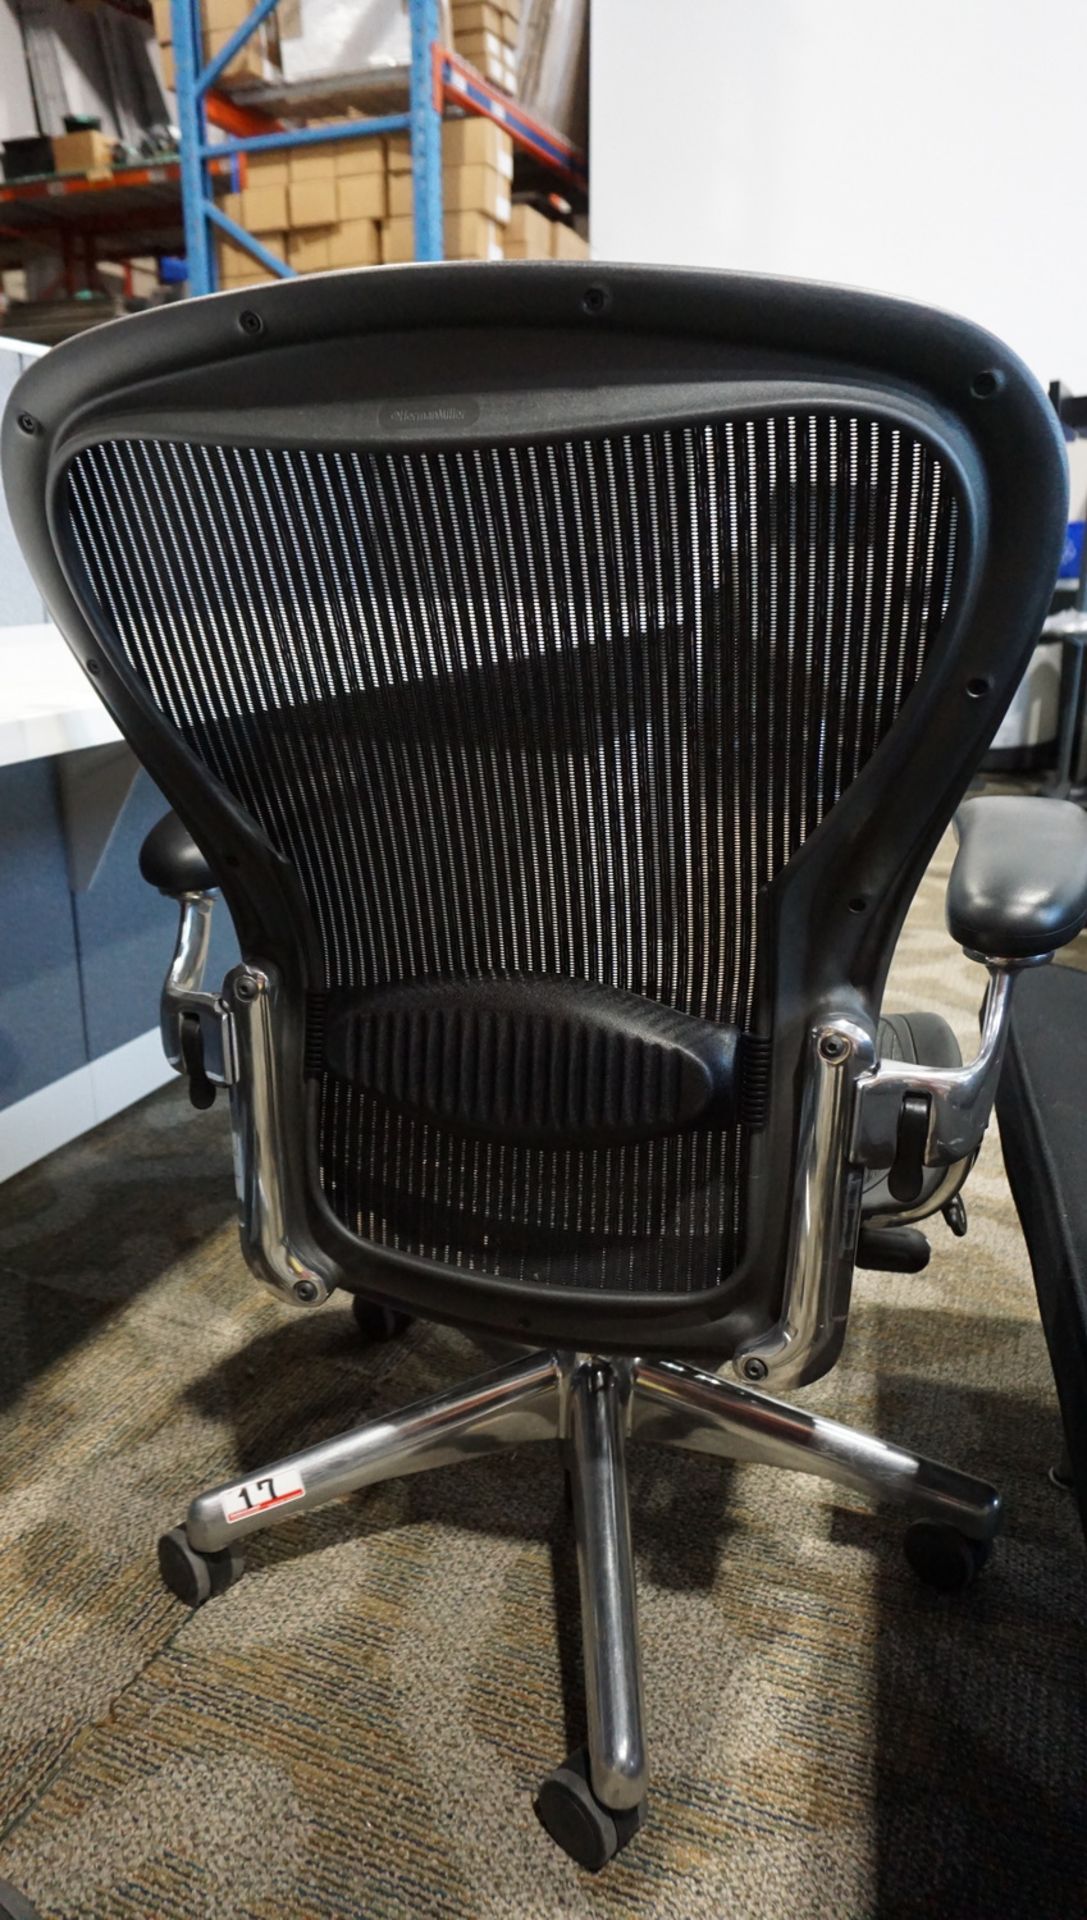 HERMAN MILLER AERON (SIZE B) OFFICE CHAIR W/ POLISHED ALUMINUM FRAME & BASE, LUMBAR SUPPORT, - Image 3 of 3